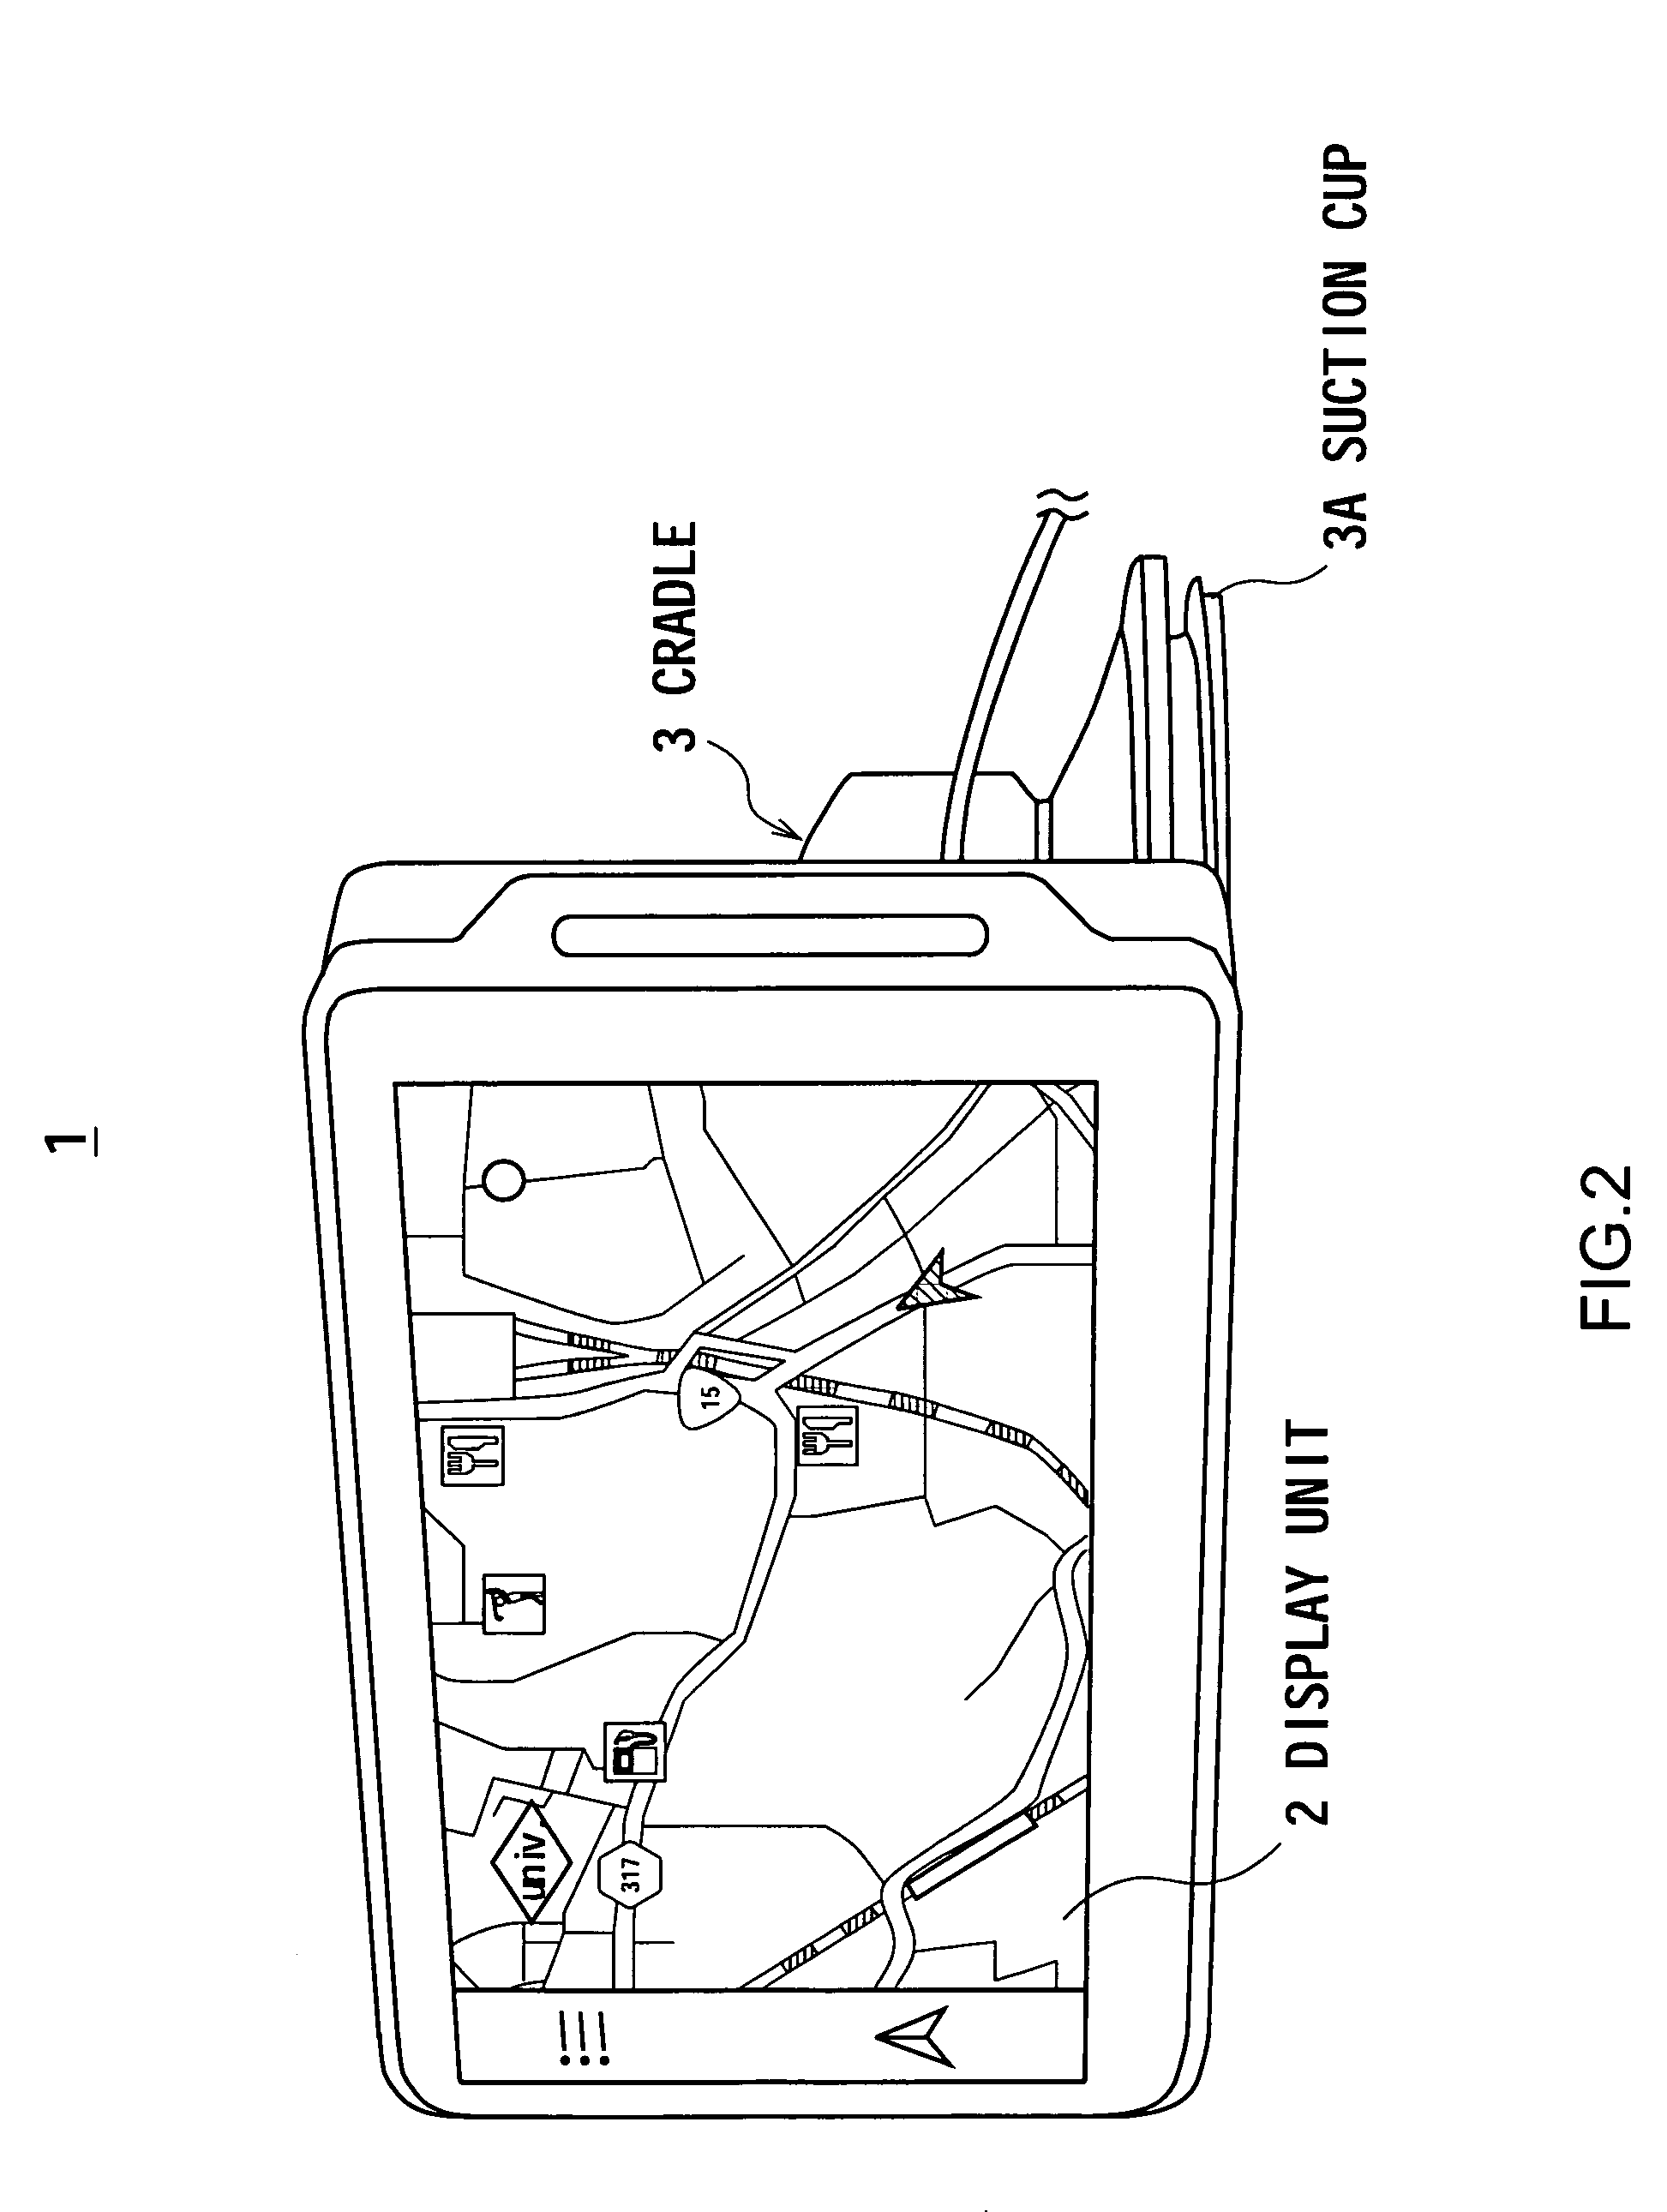 Navigation apparatus, search result display method, and graphical user interface